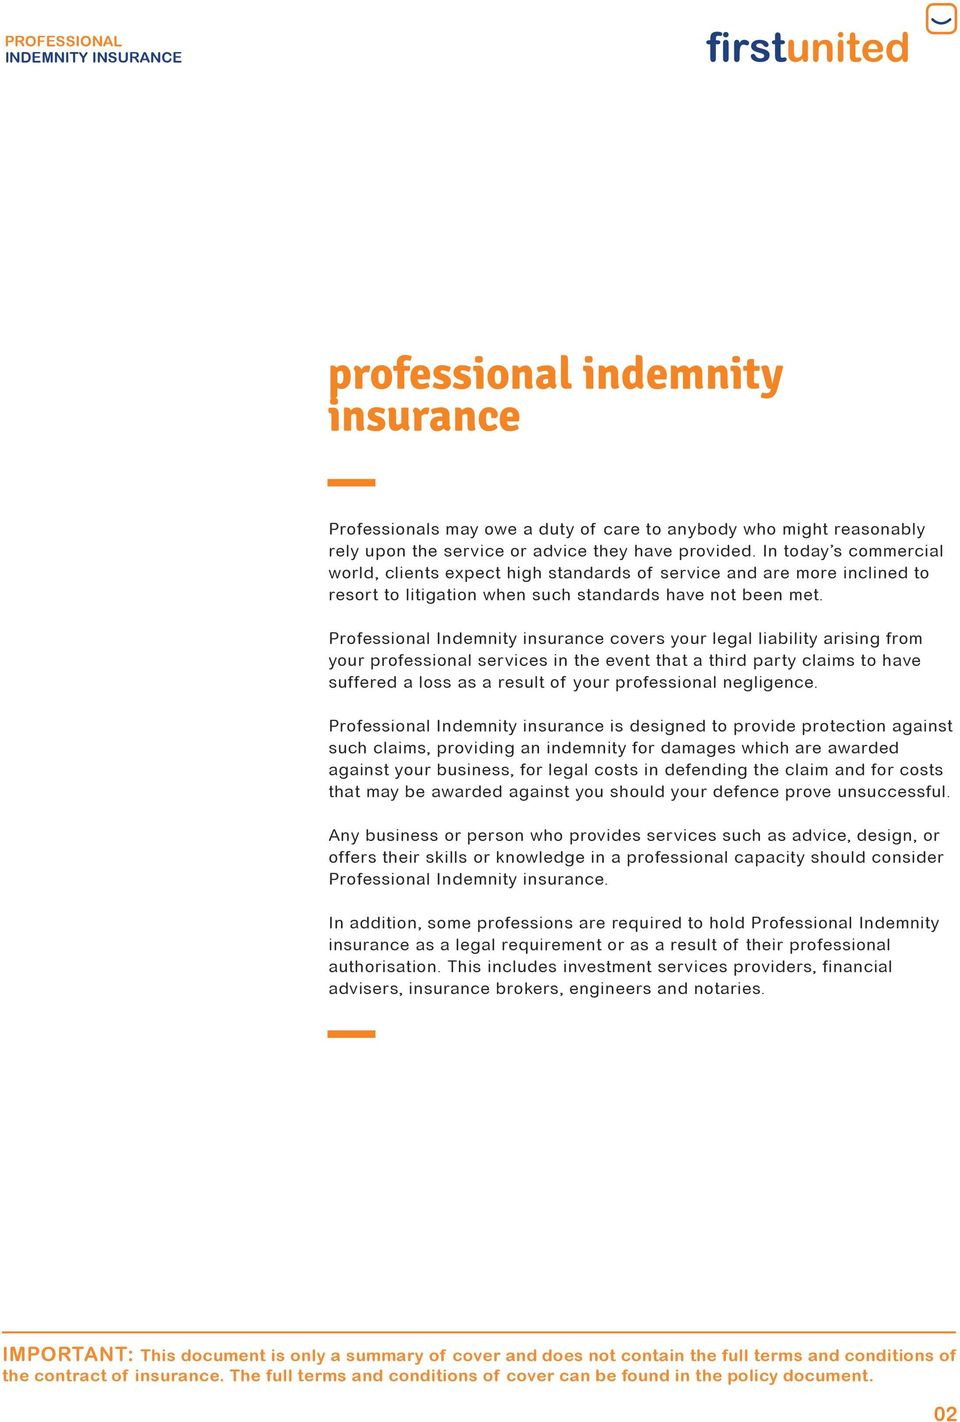 Professional Indemnity insurance covers your legal liability arising from your professional services in the event that a third party claims to have suffered a loss as a result of your professional